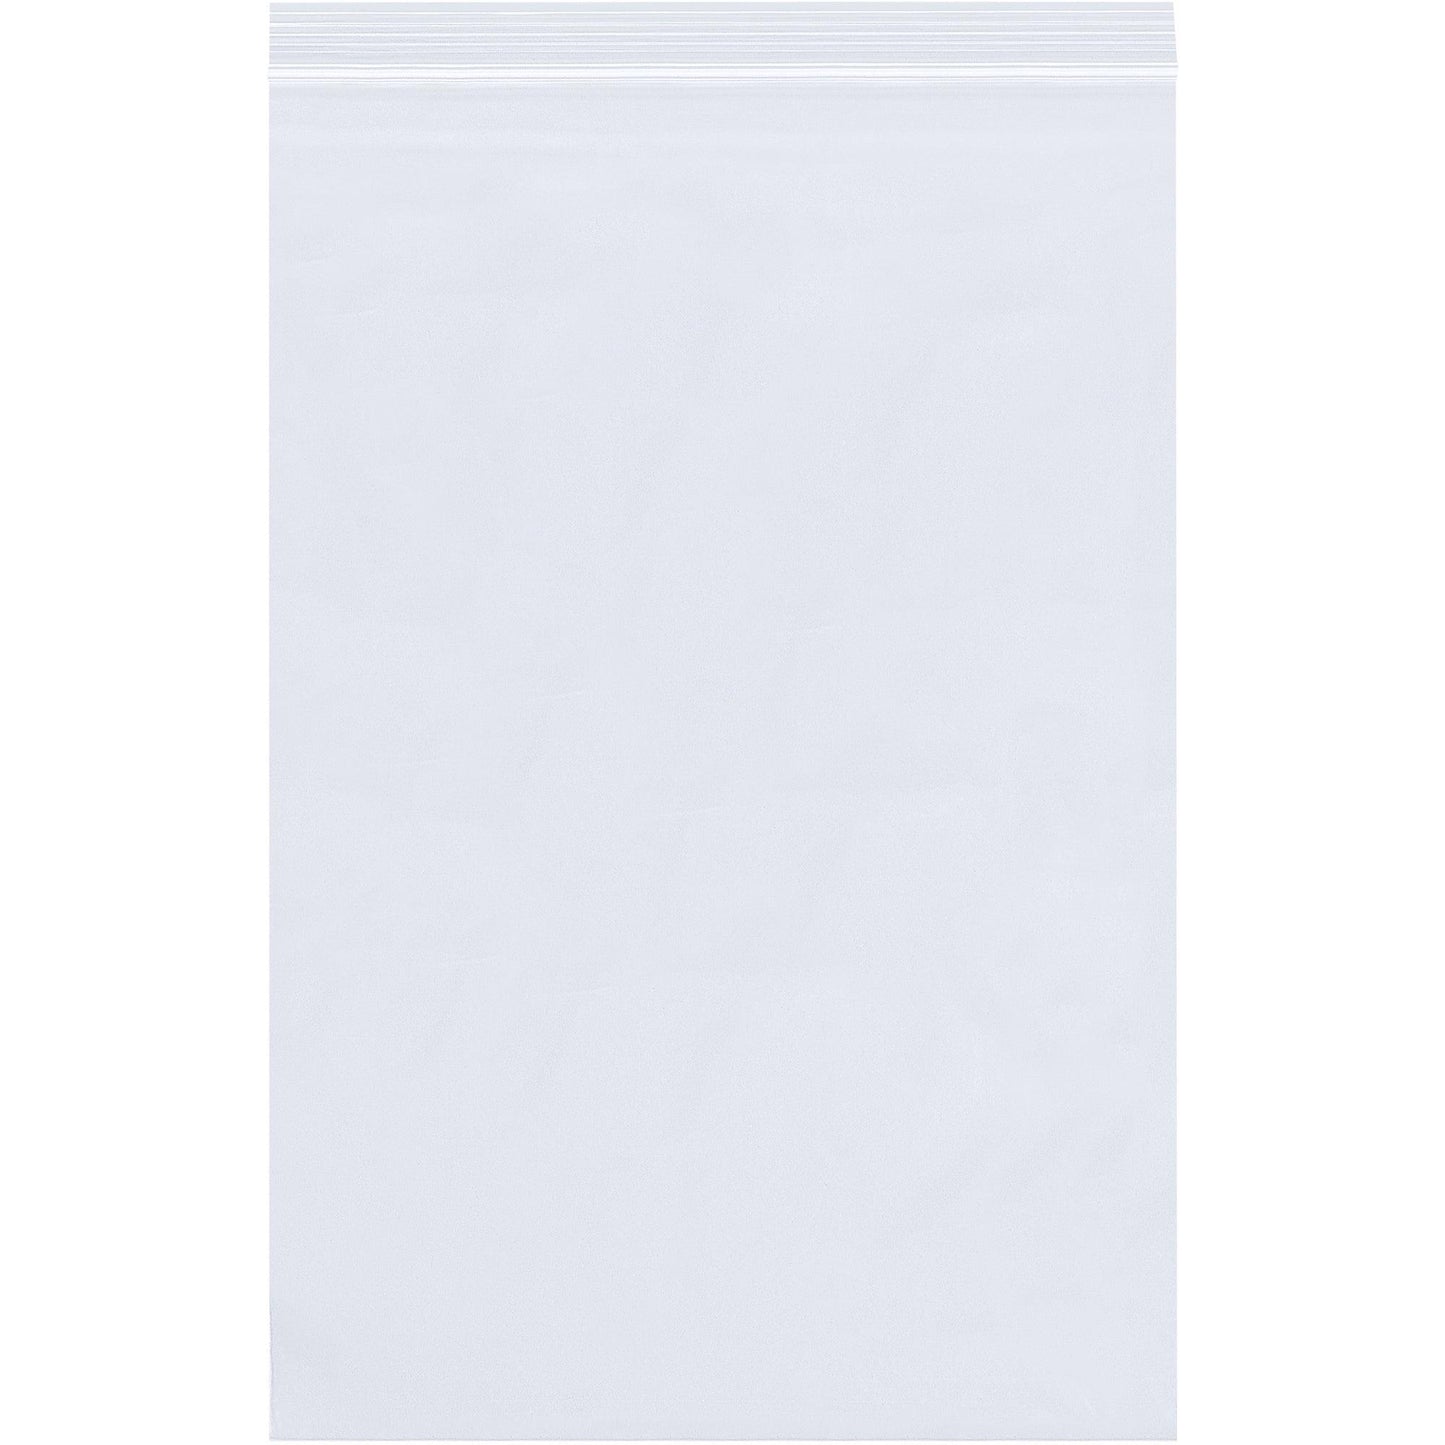 8 x 8" - 2 Mil Reclosable Poly Bags - PB3630